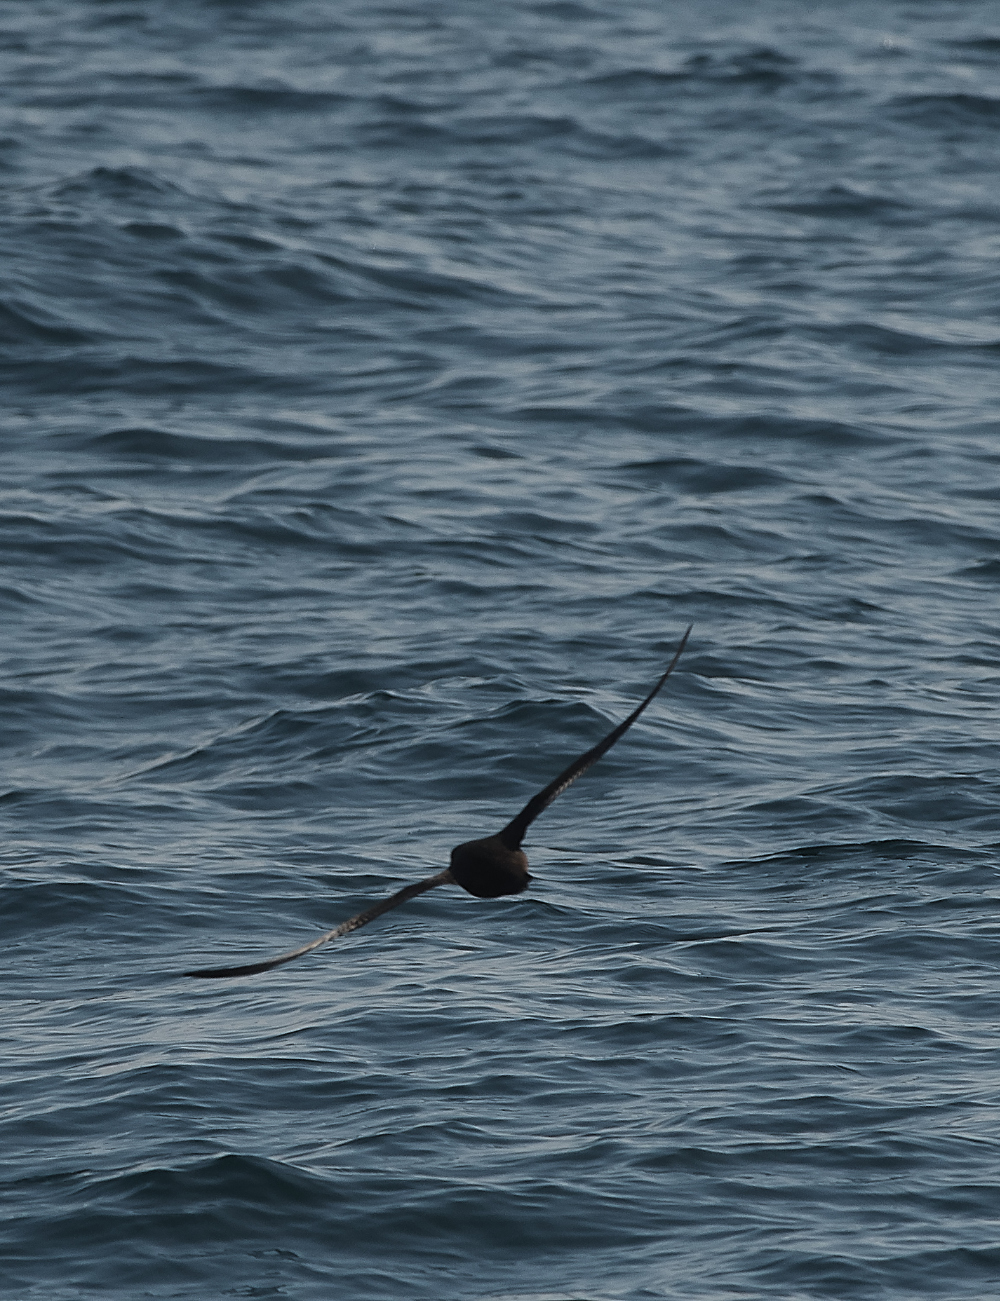 ScillyPelagic3SootyShearwater240819-1